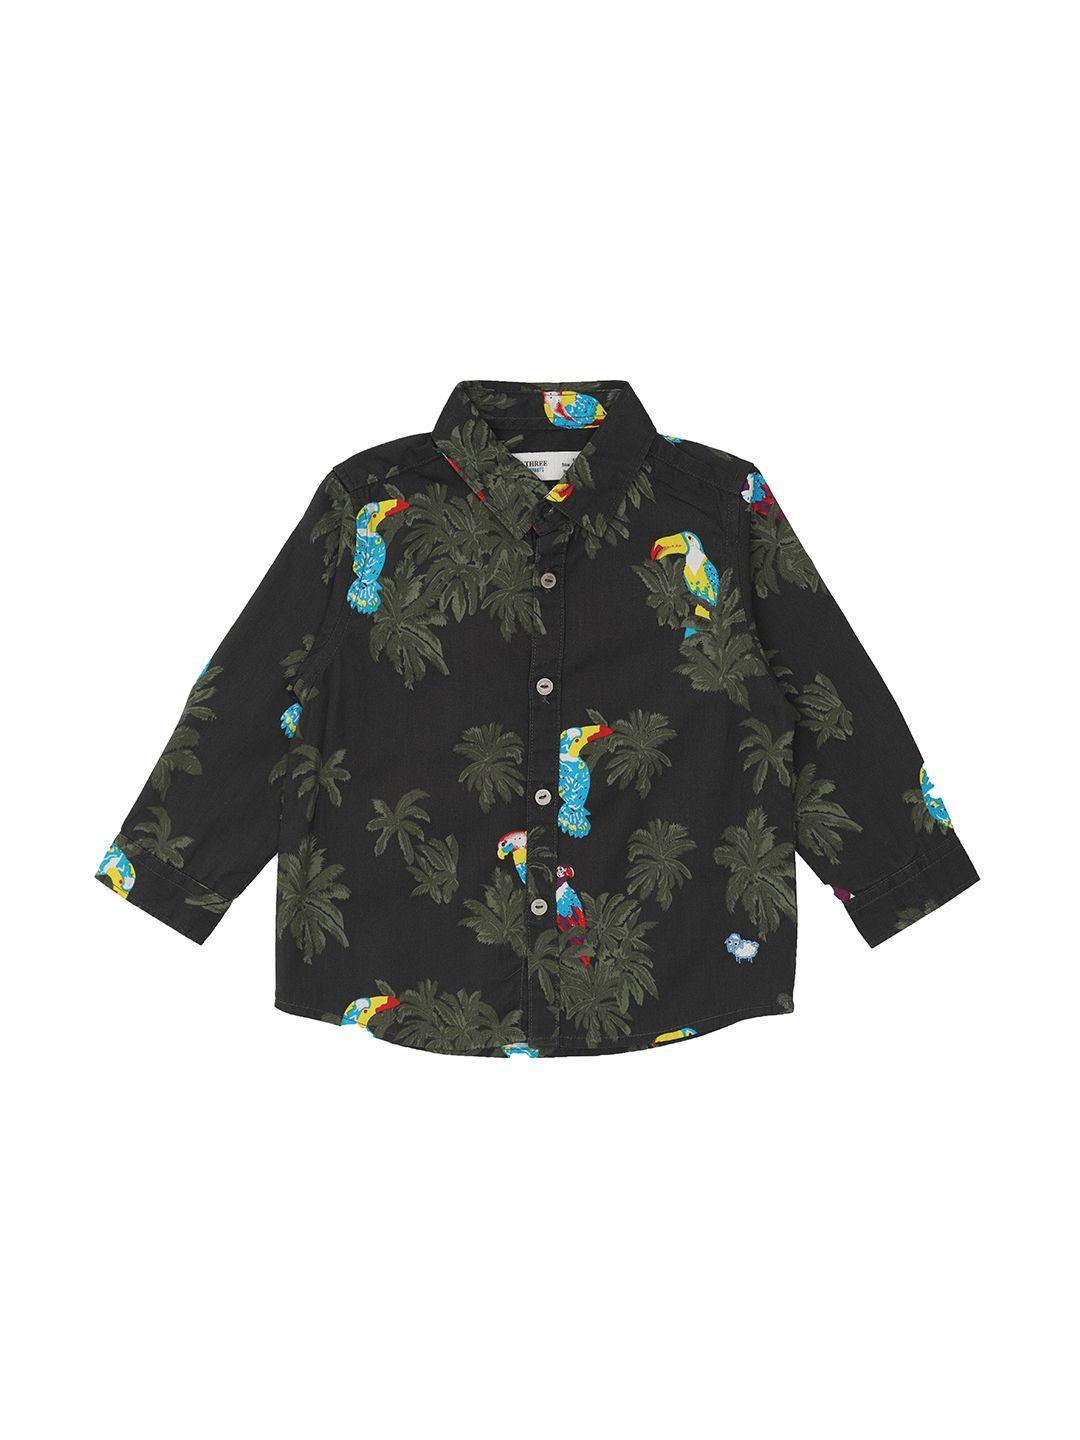 zero three infant boys charcoal black standard floral printed cotton casual shirt